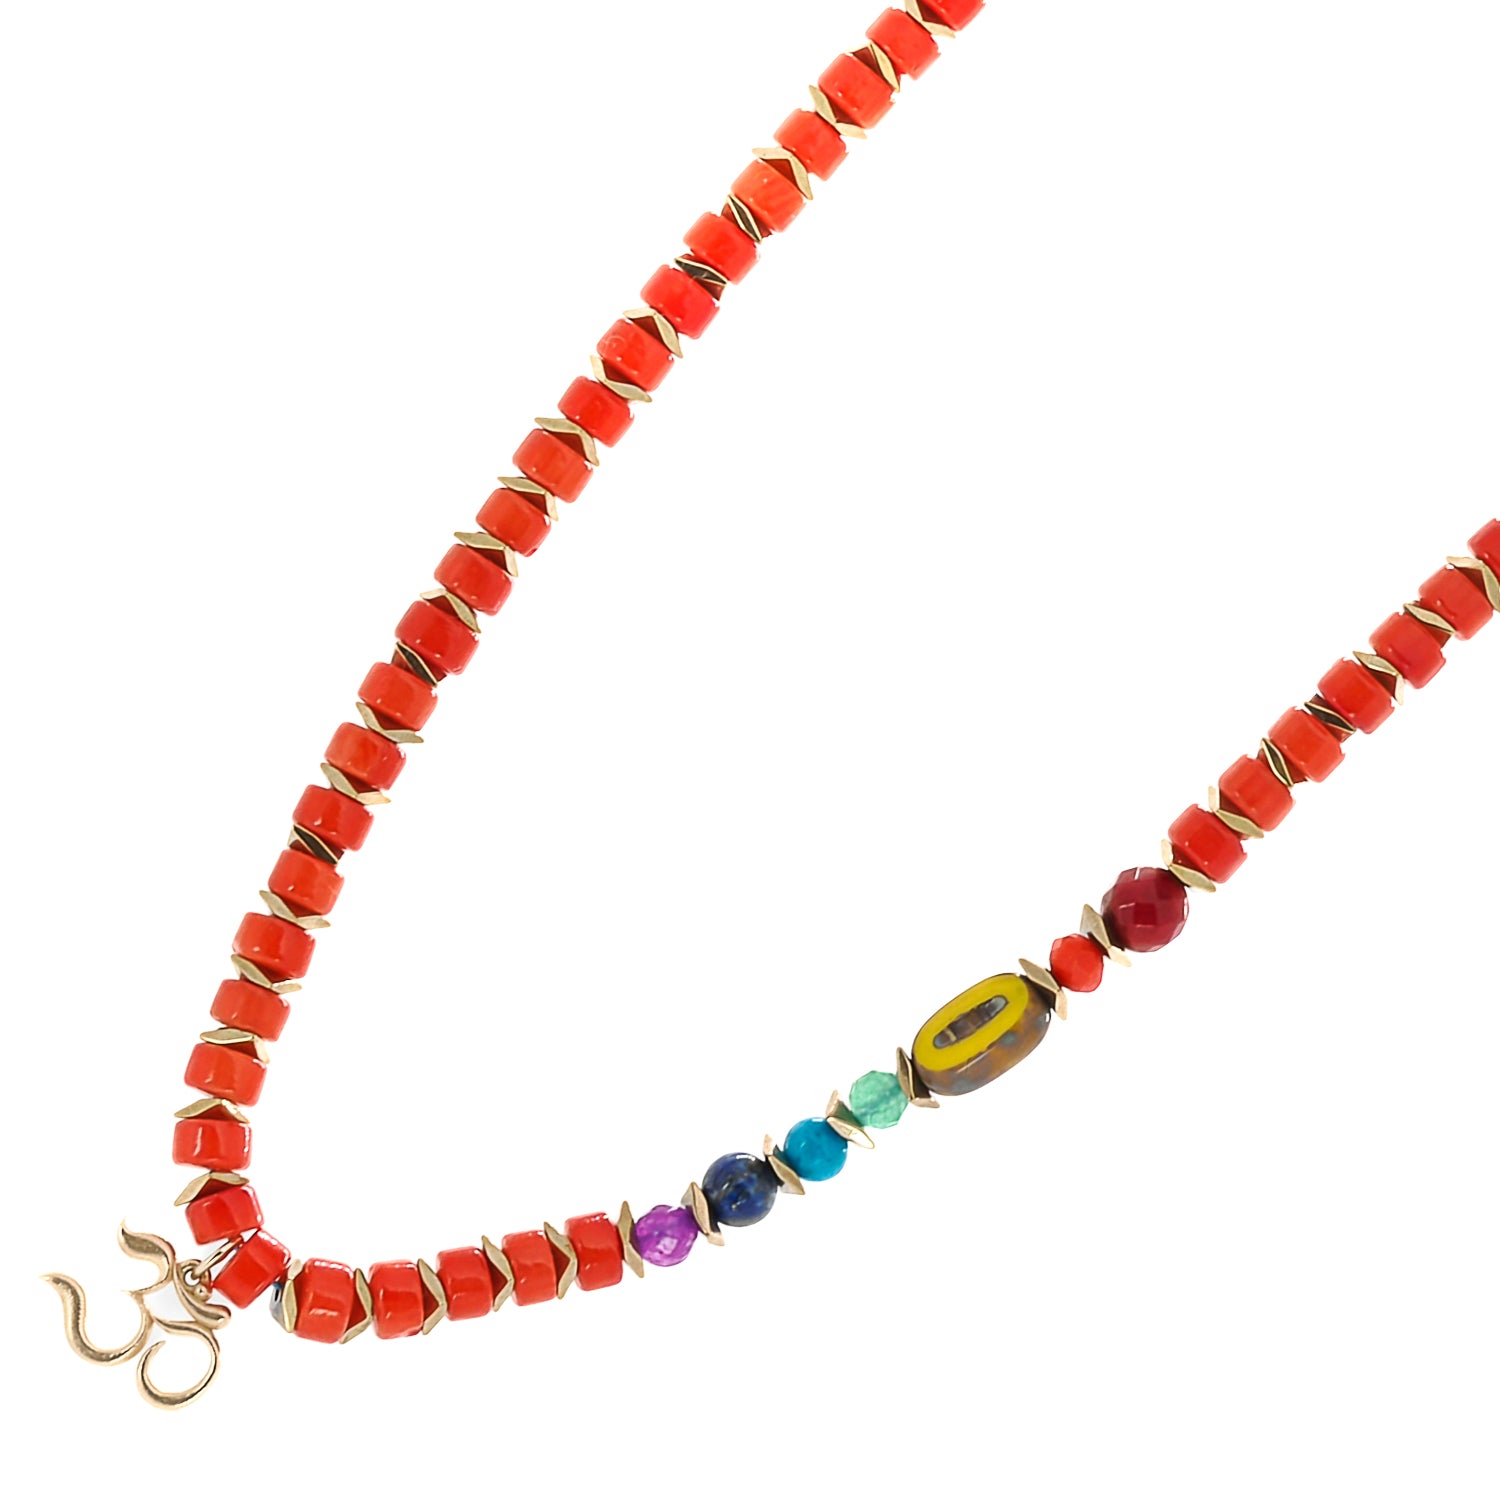 Chakra-colored natural beads, representing the seven energy centers of the body, creating a vibrant and balanced design in the Chakra Necklace.